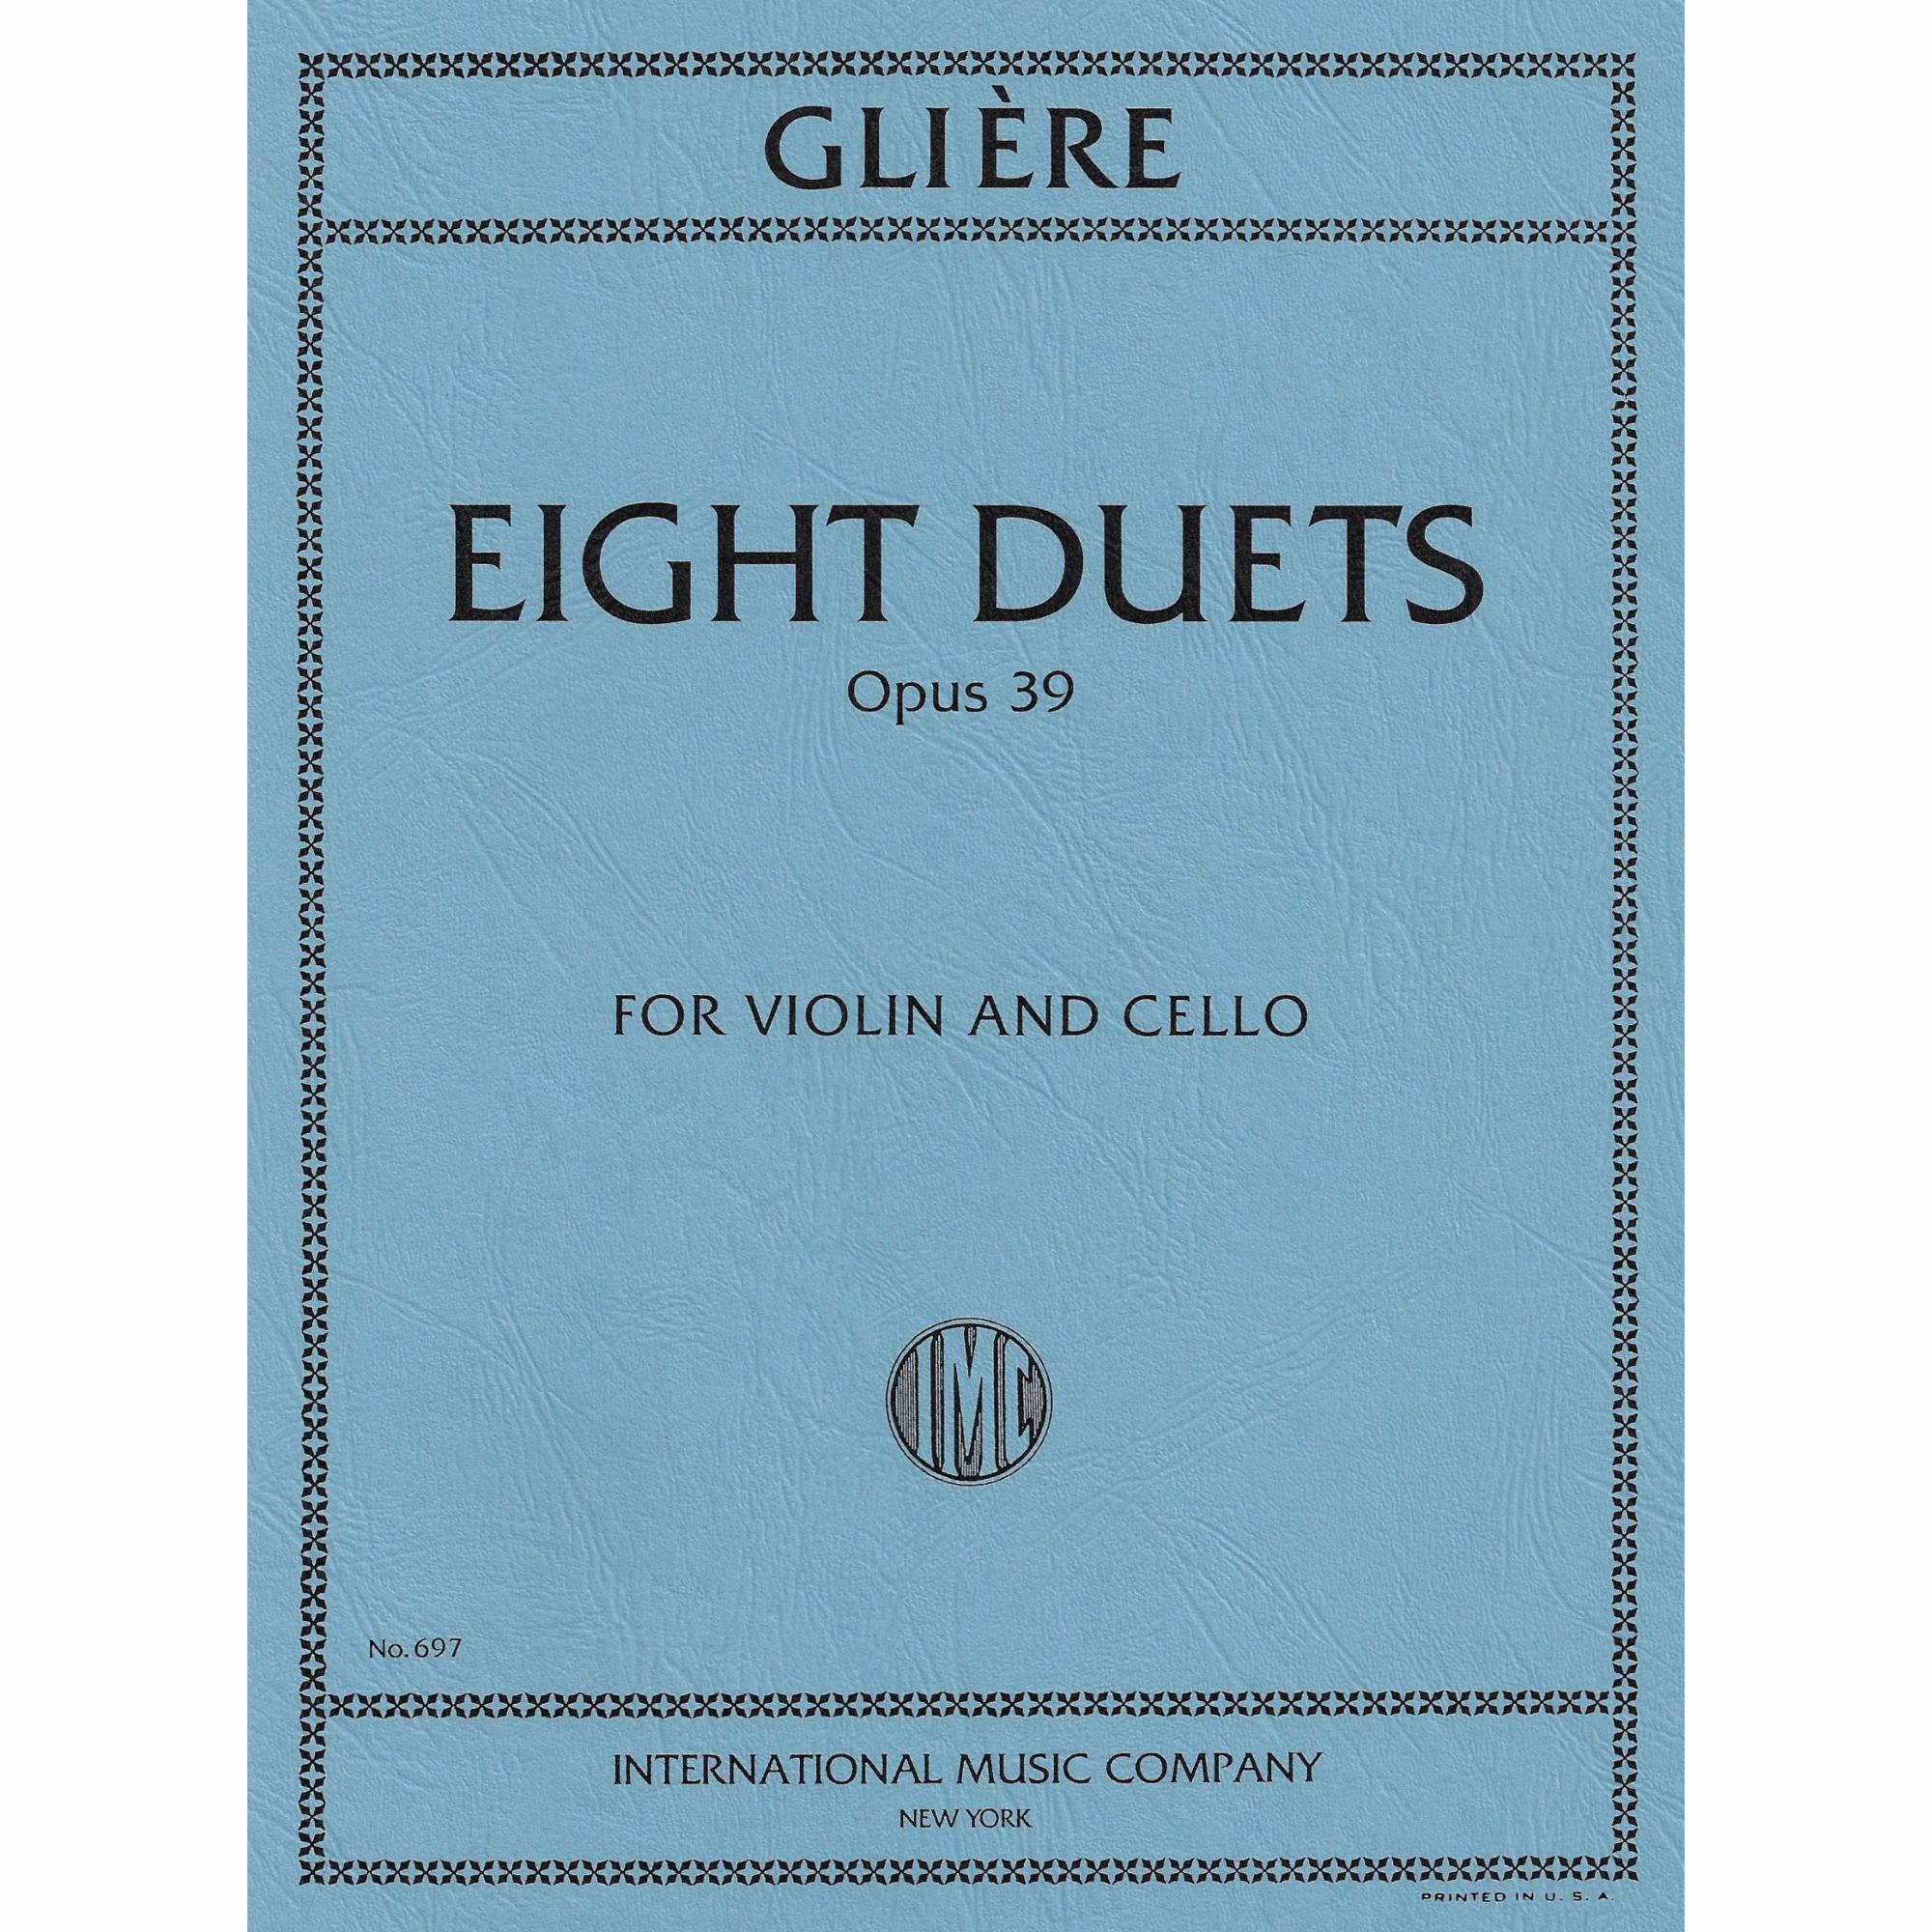 Gliere -- Eight Duets, Op. 39 for Violin and Cello